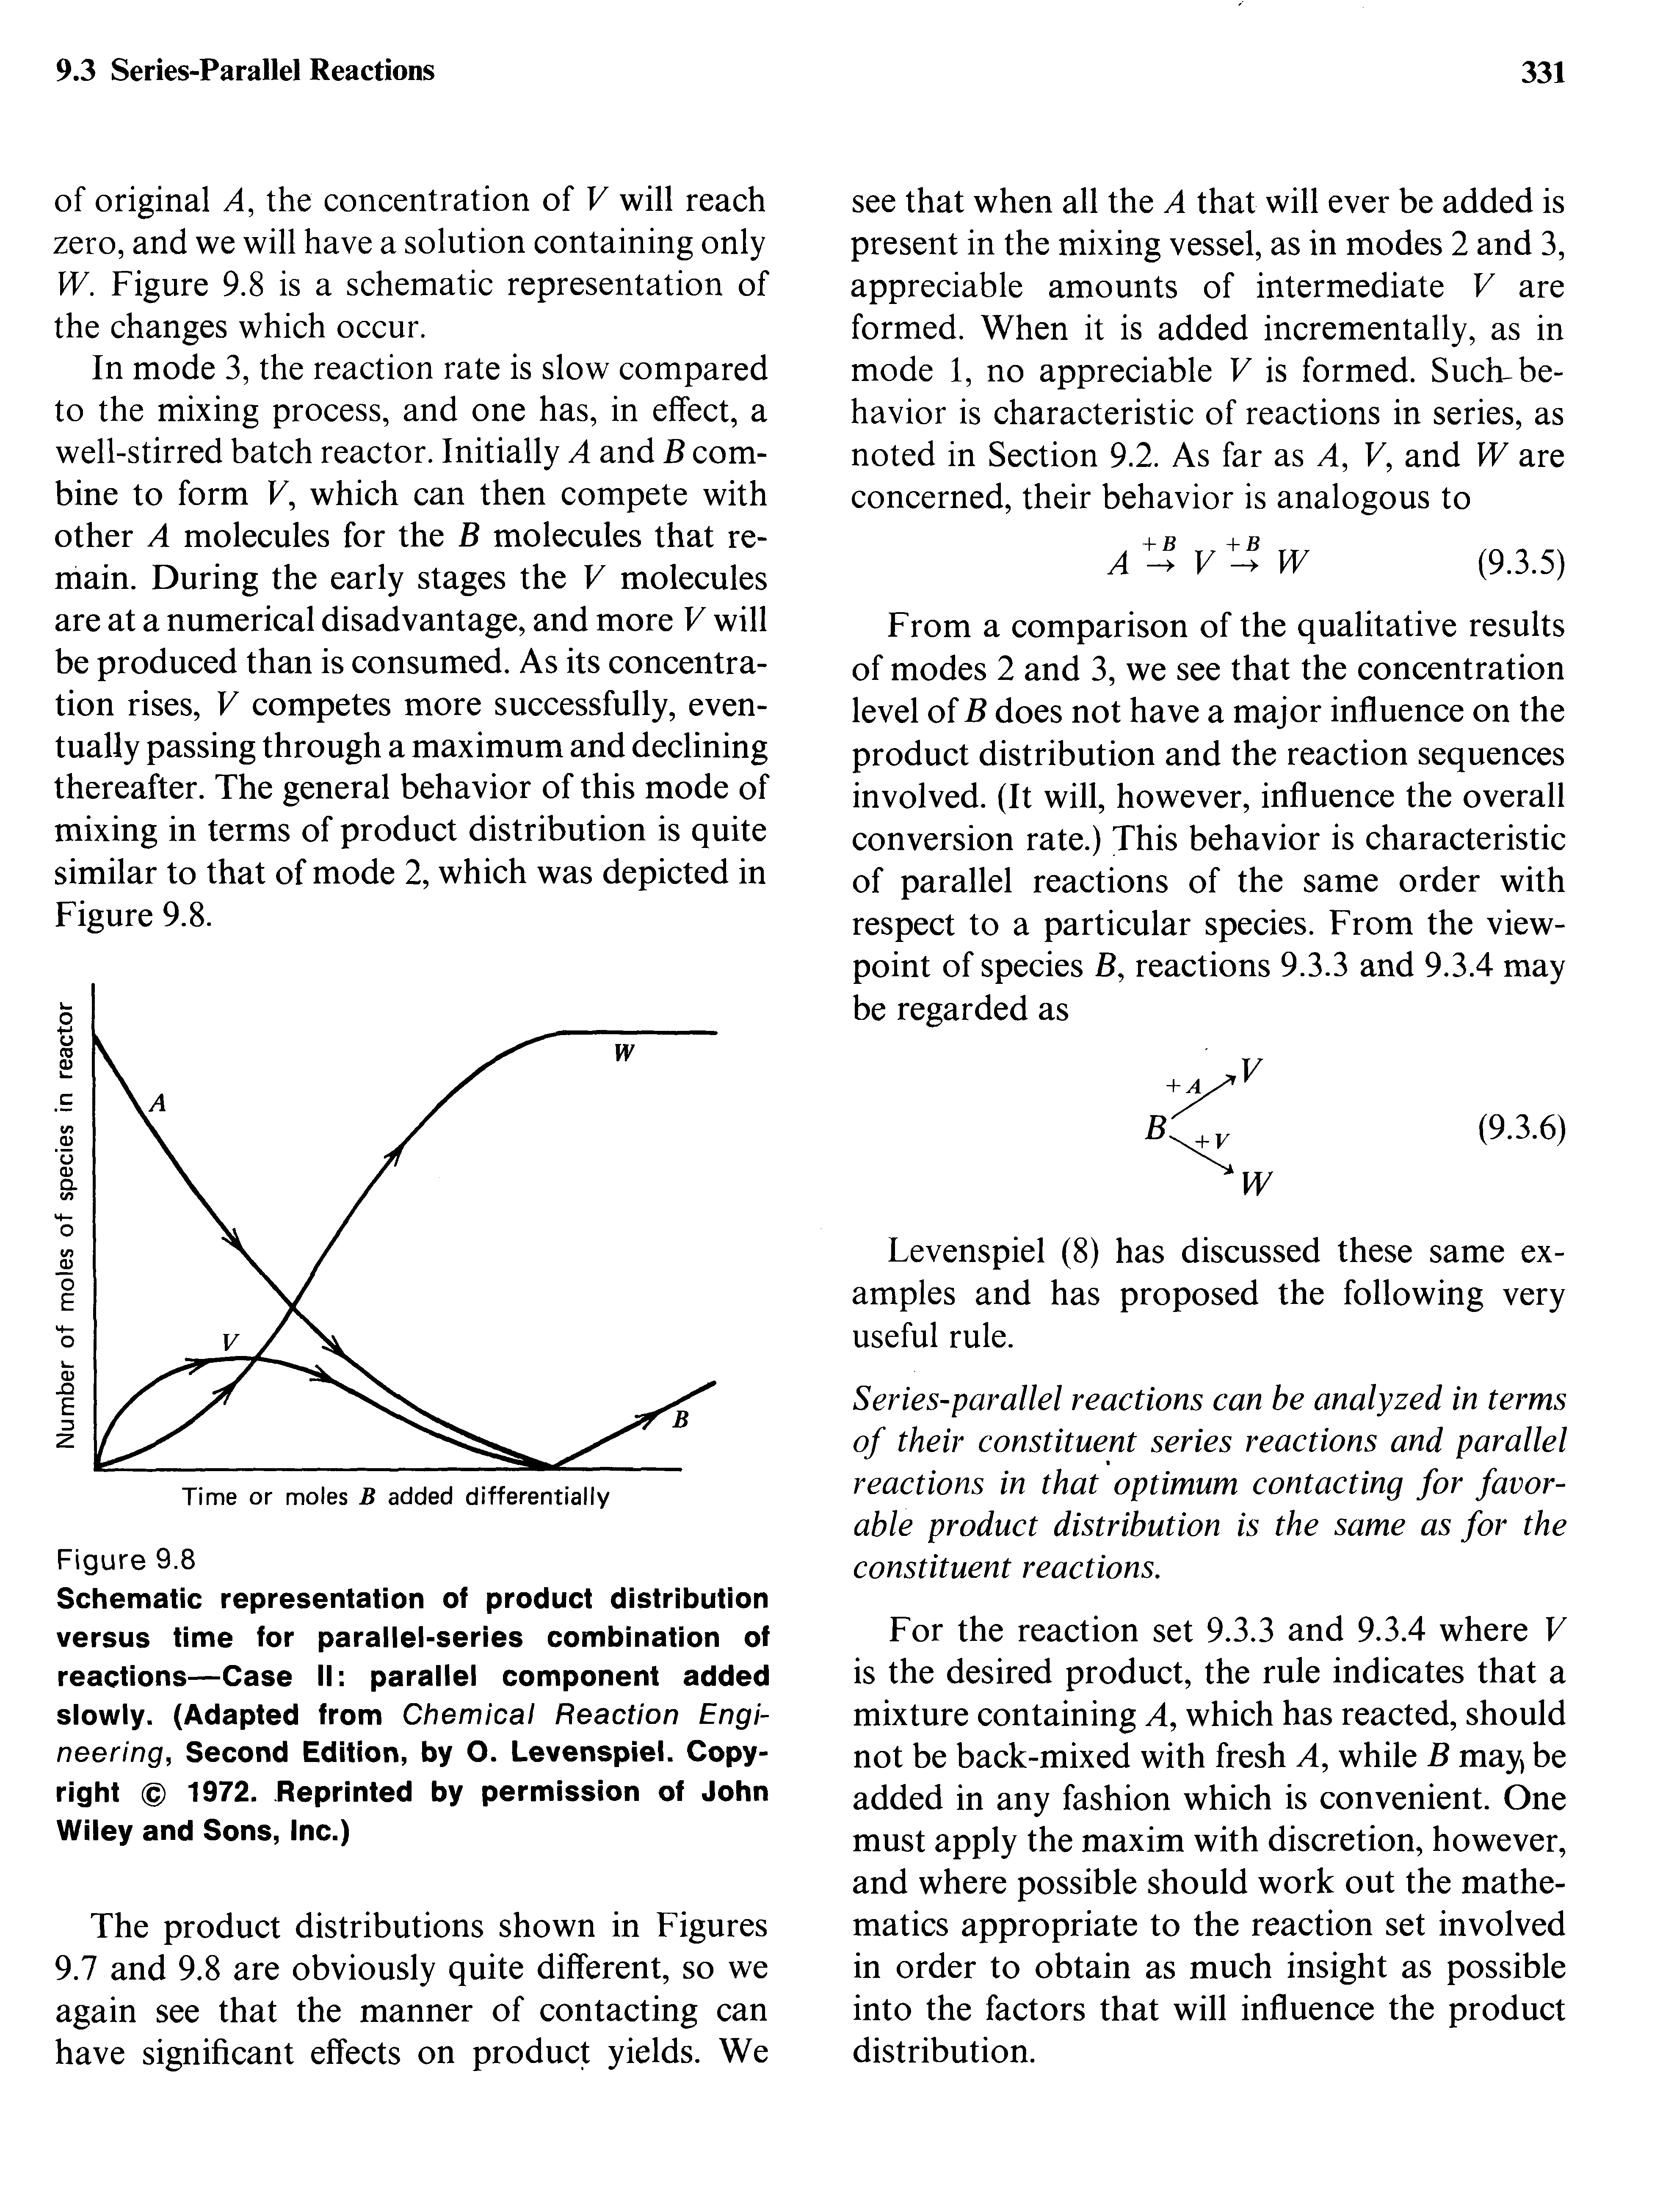 Schematic representation of product distribution versus time for parallel-series combination of reactions—Case II parallel component added slowly. (Adapted from Chemical Reaction Engineering, Second Edition, by O. Levenspiel. Copyright 1972. Reprinted by permission of John Wiley and Sons, Inc.)...